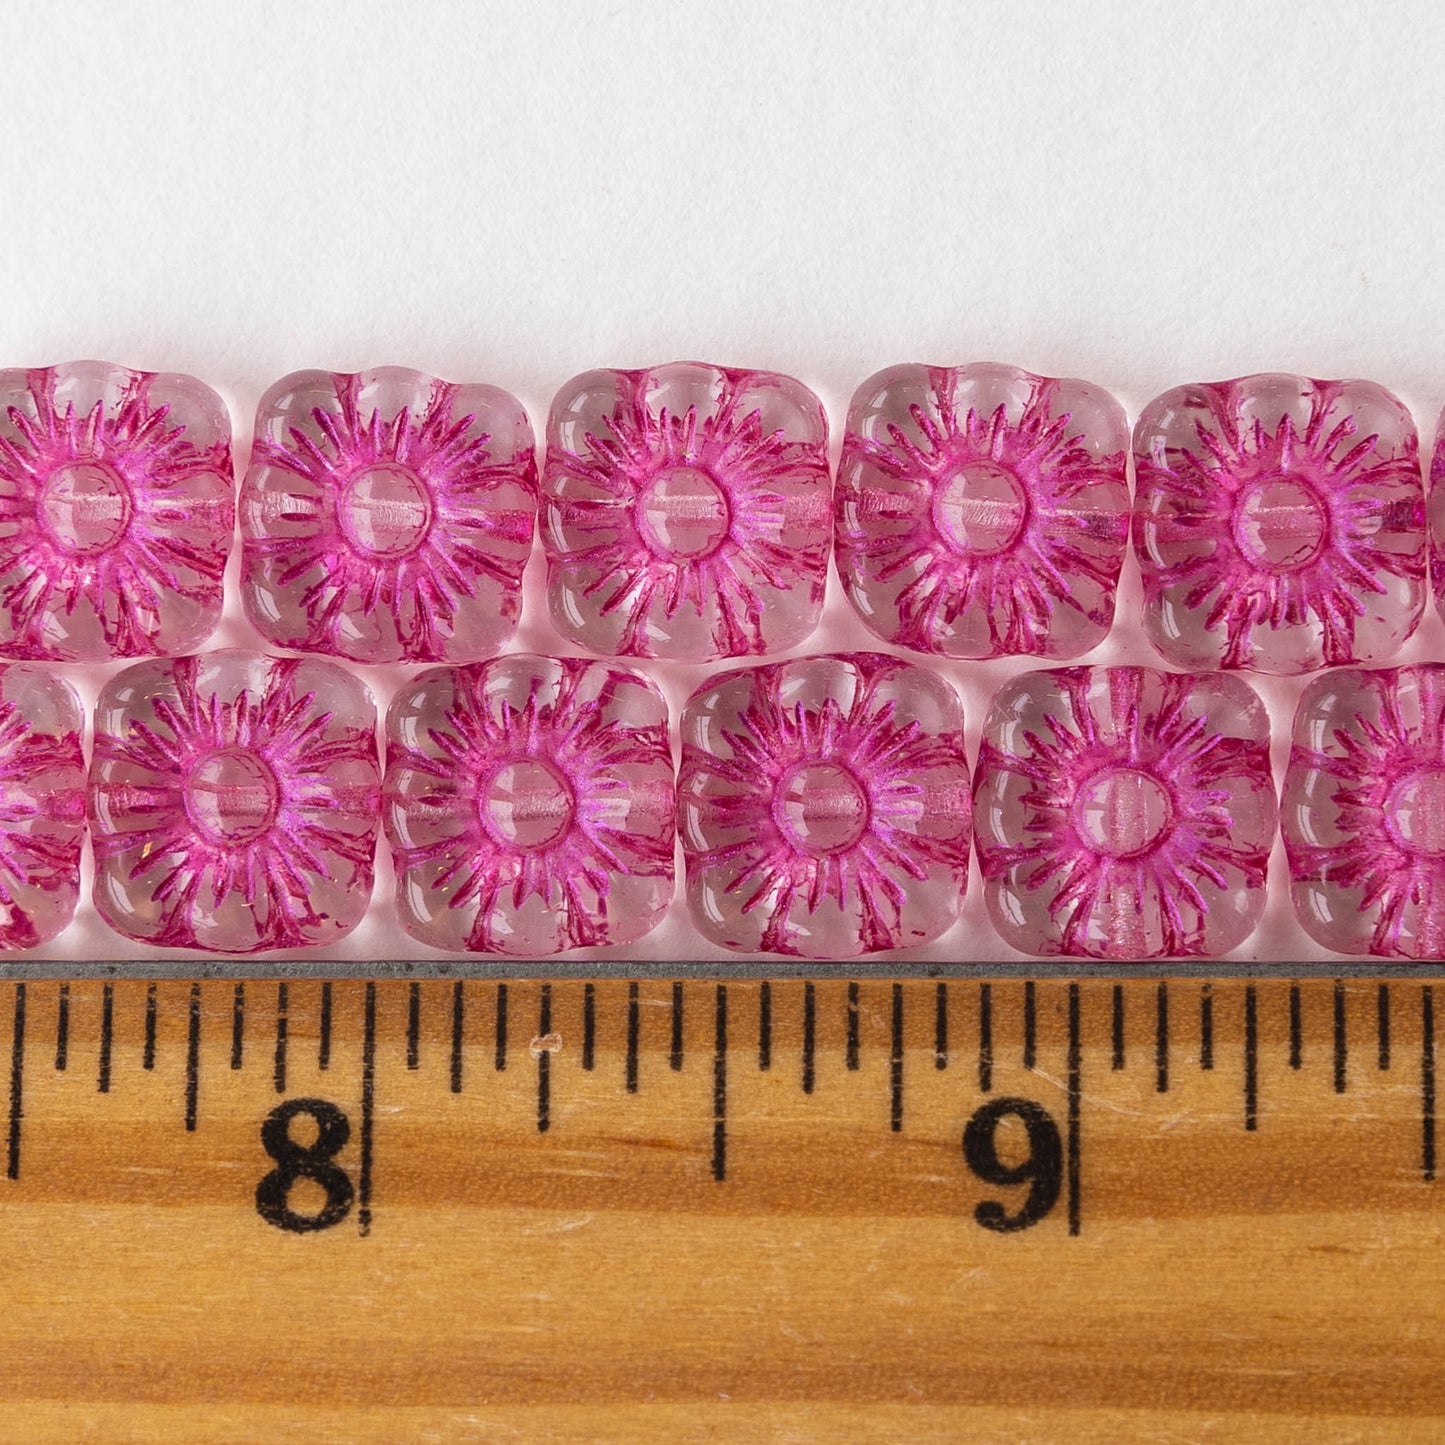 11mm Glass Flower Beads - Crystal with Pink - 20 beads